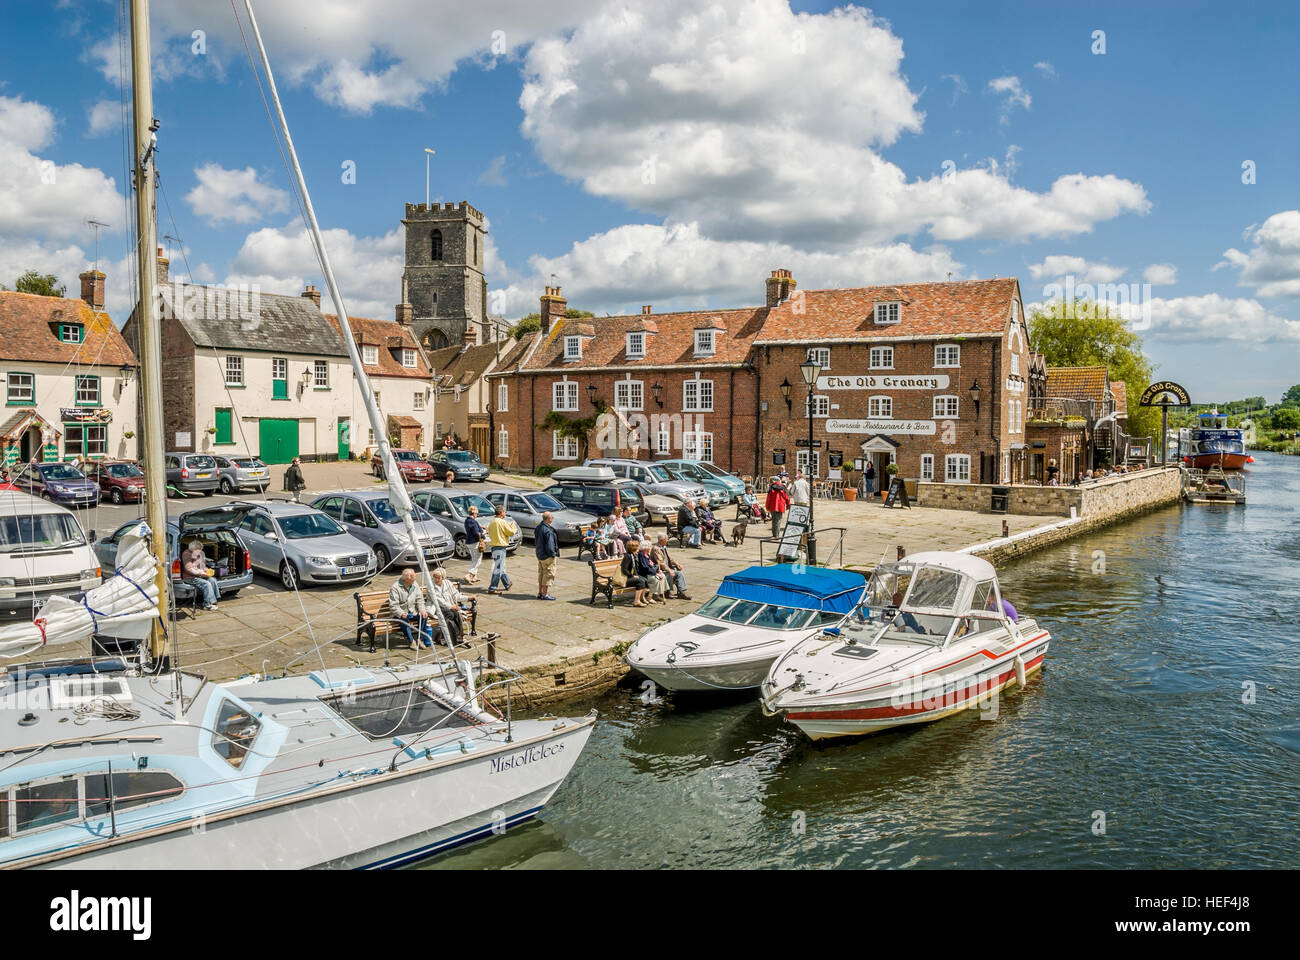 Sightseeing ship and 'The old Canary' Pub at the Wareham Wharf on the River Frome, Dorset, South East England. Stock Photo